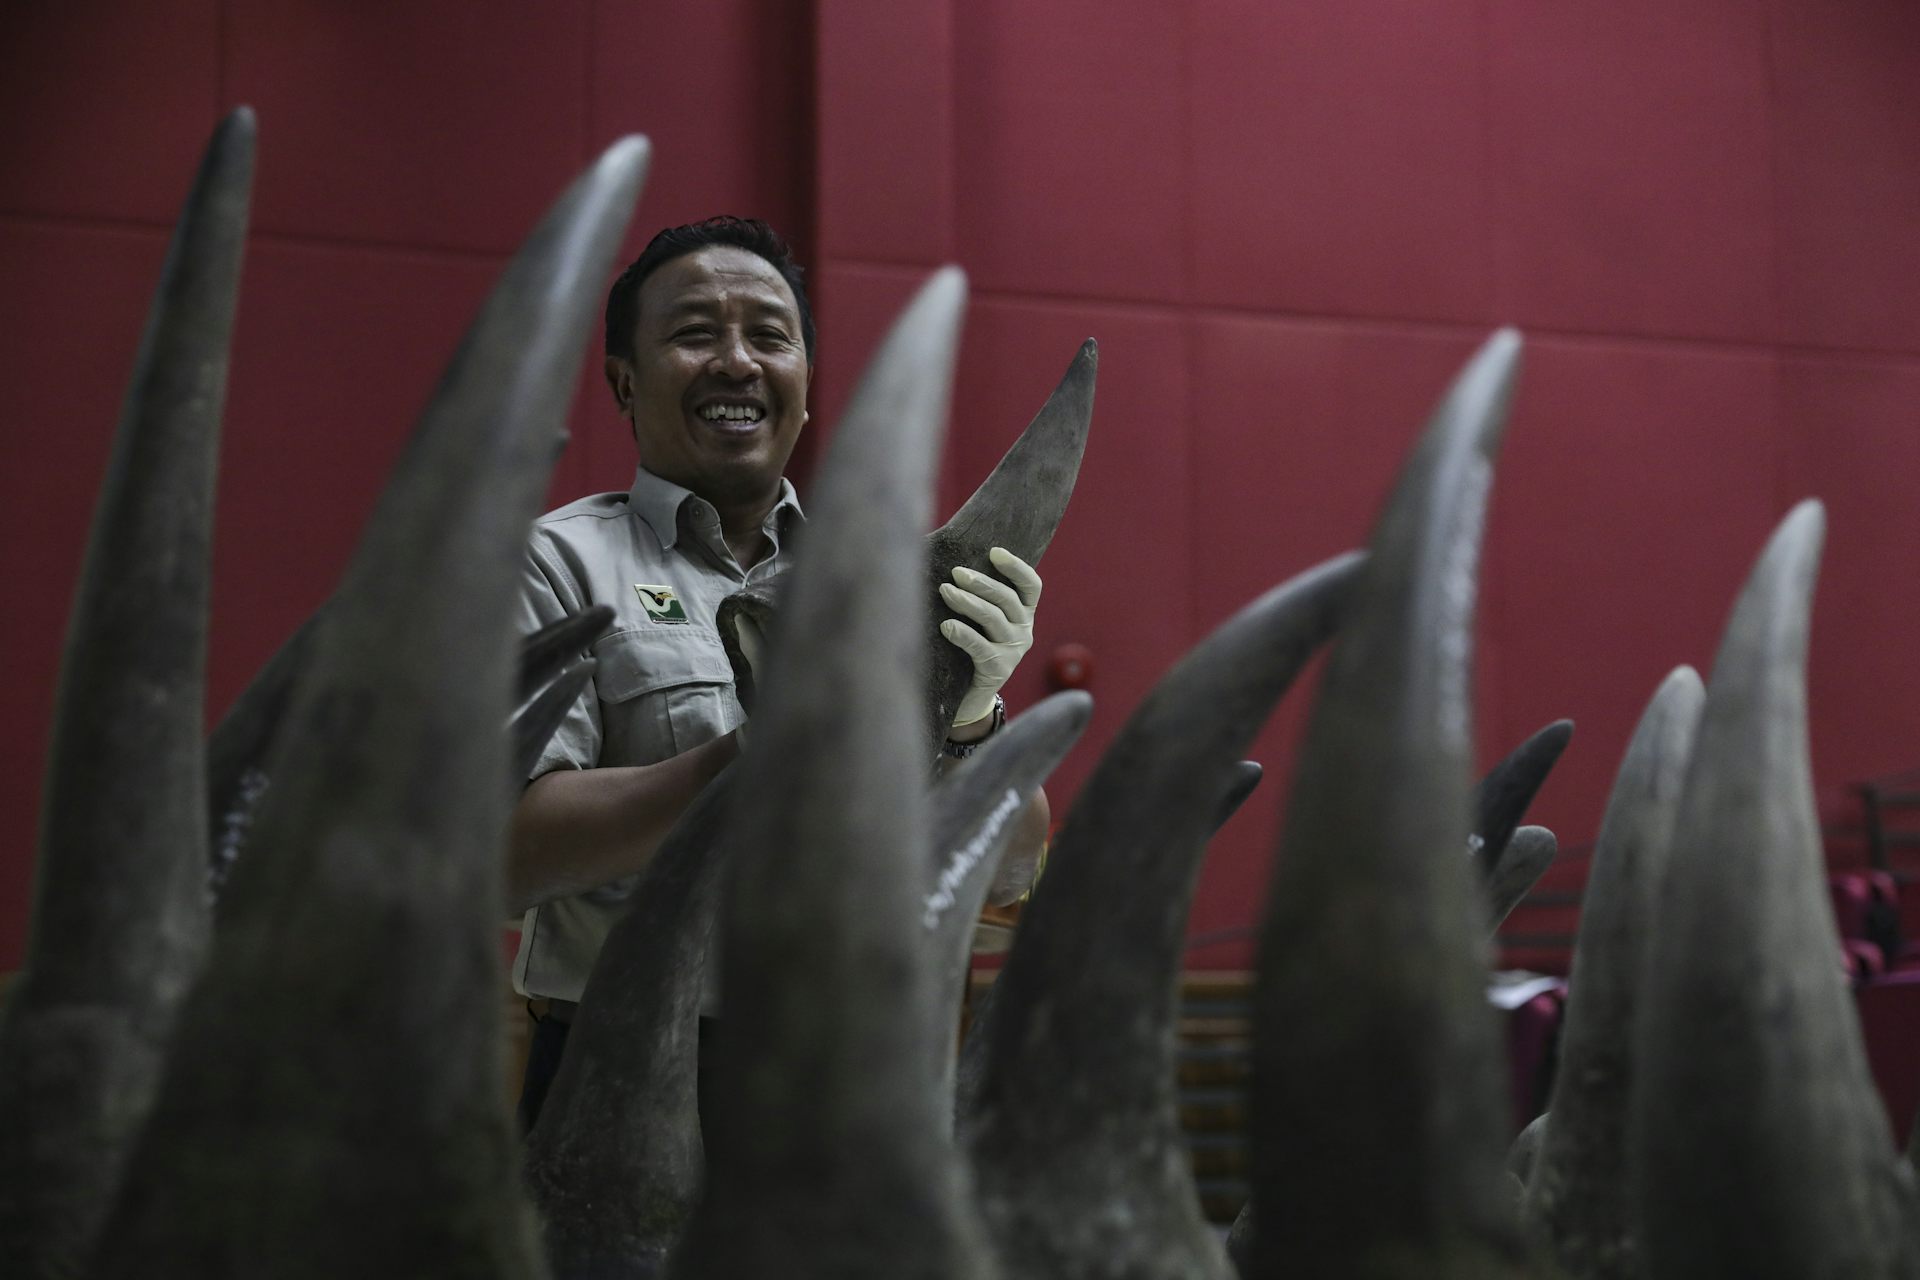 We Asked People in Vietnam Why They Use Rhino Horn. Here’s What They Said